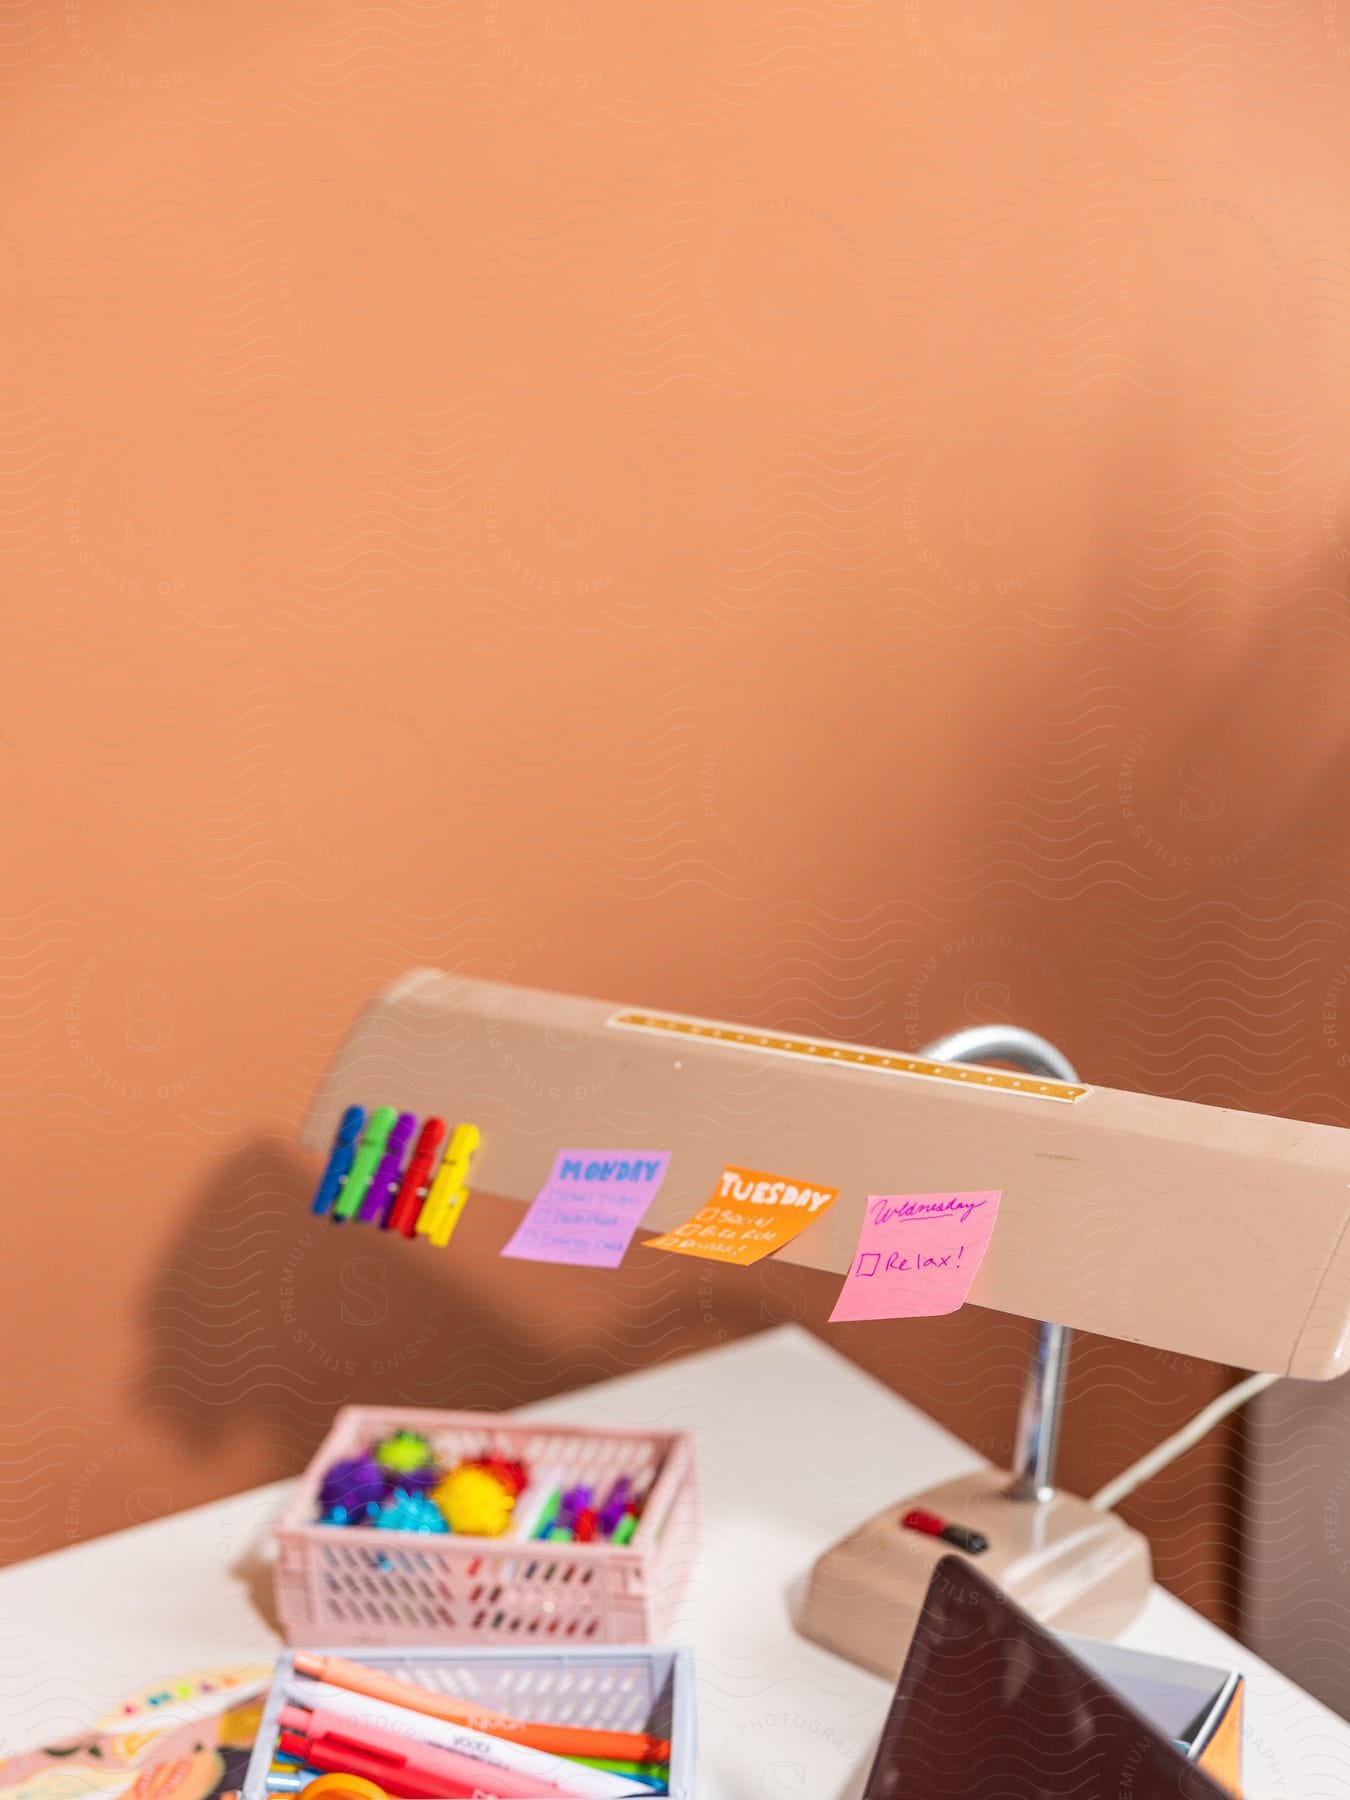 A desk lamp with colorful sticky notes attached, on a desk with a basket of markers, against an orange wall.